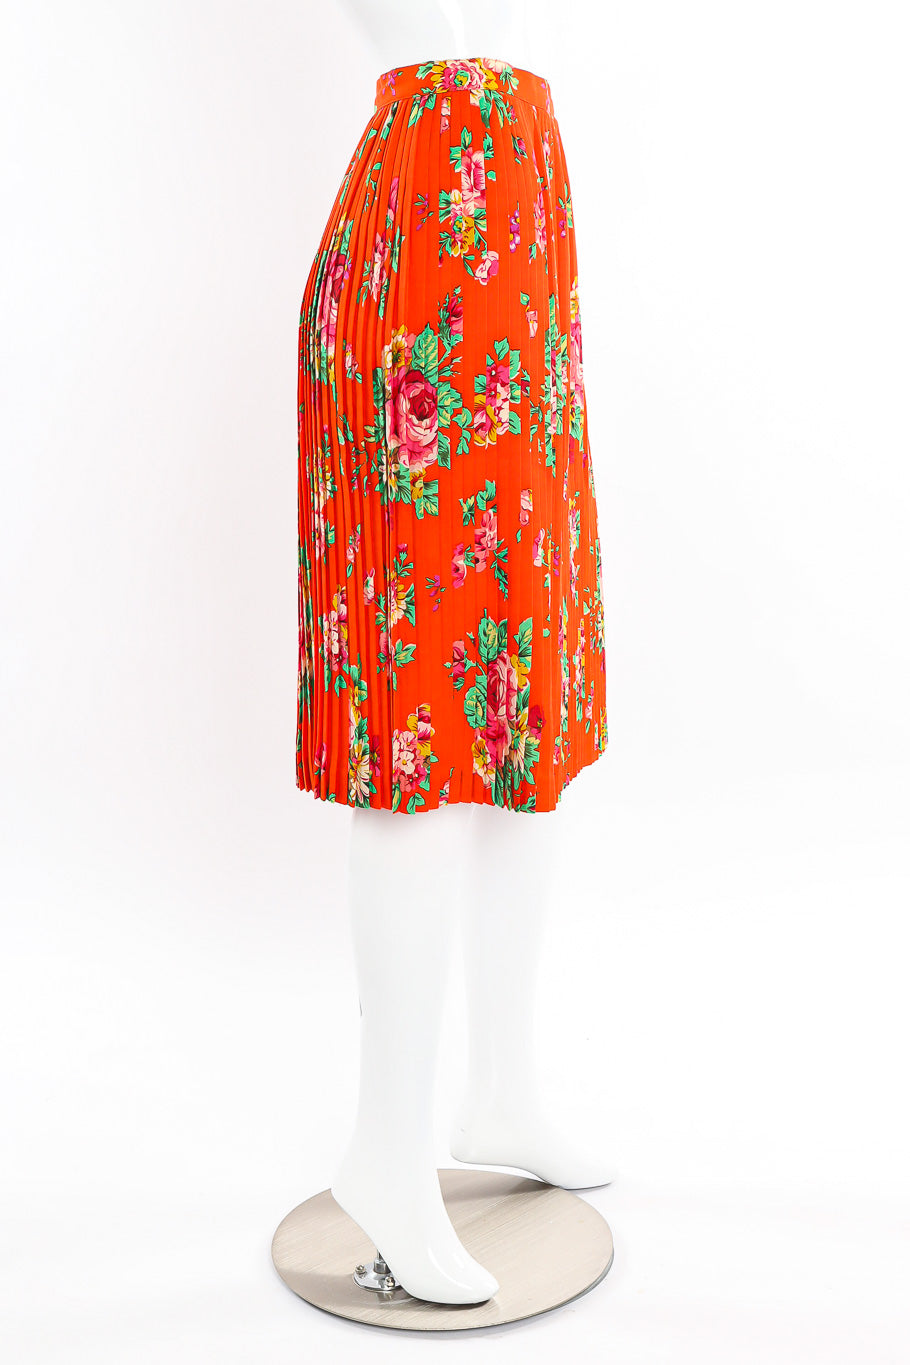 Bright floral pleated skirt by Kenzo Paris mannequin side view @recessla